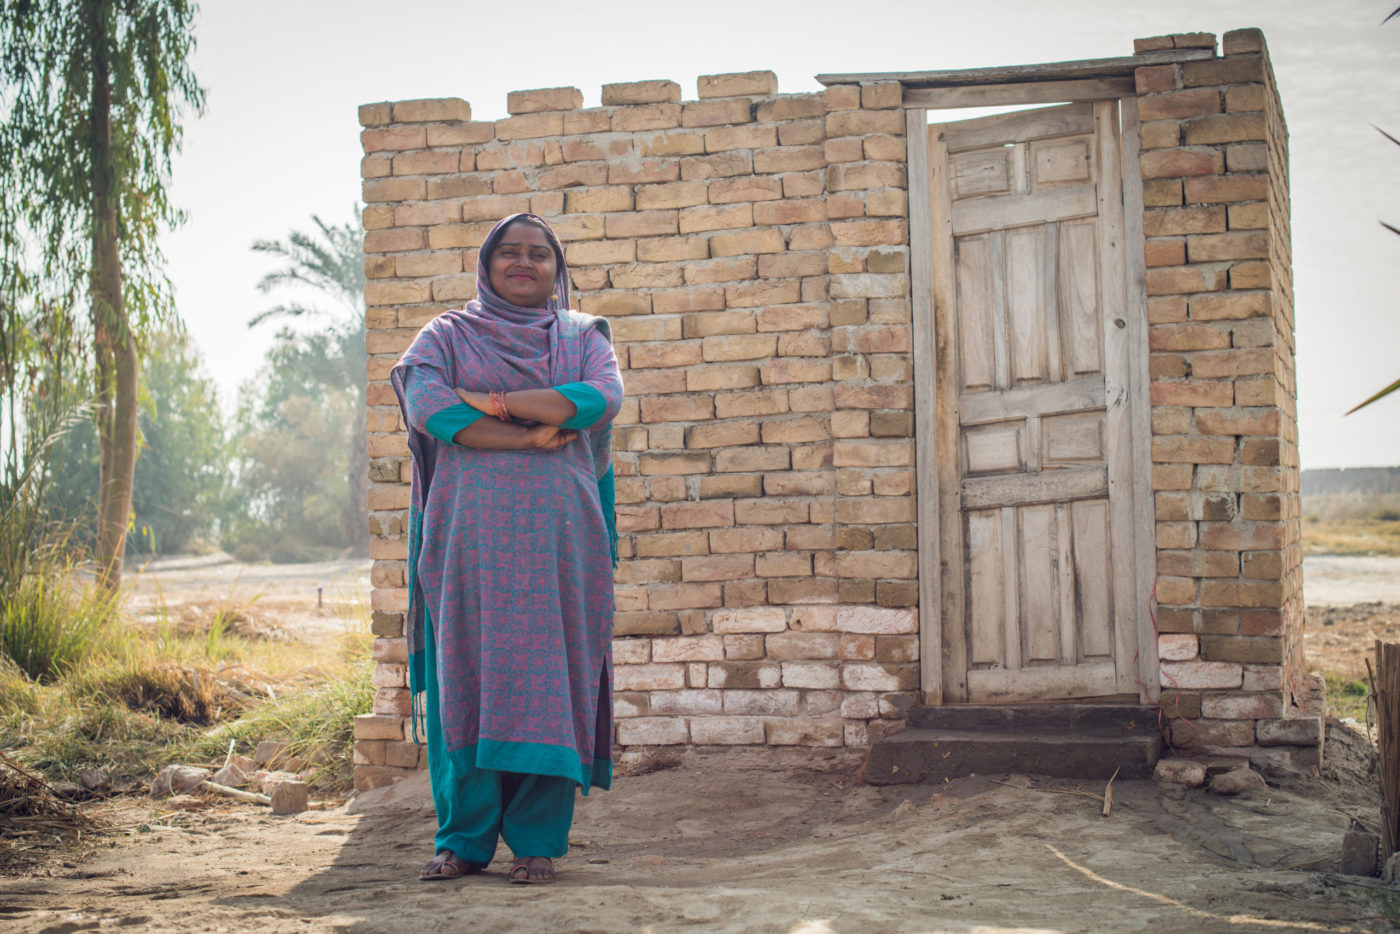 Shazia Qasim, 24, in front of the washroom in her home in the village of Chaoni, District Muzaffargarh, Province Punjab, Pakistan, December 2017. She stands with her arms folded and looking happy.